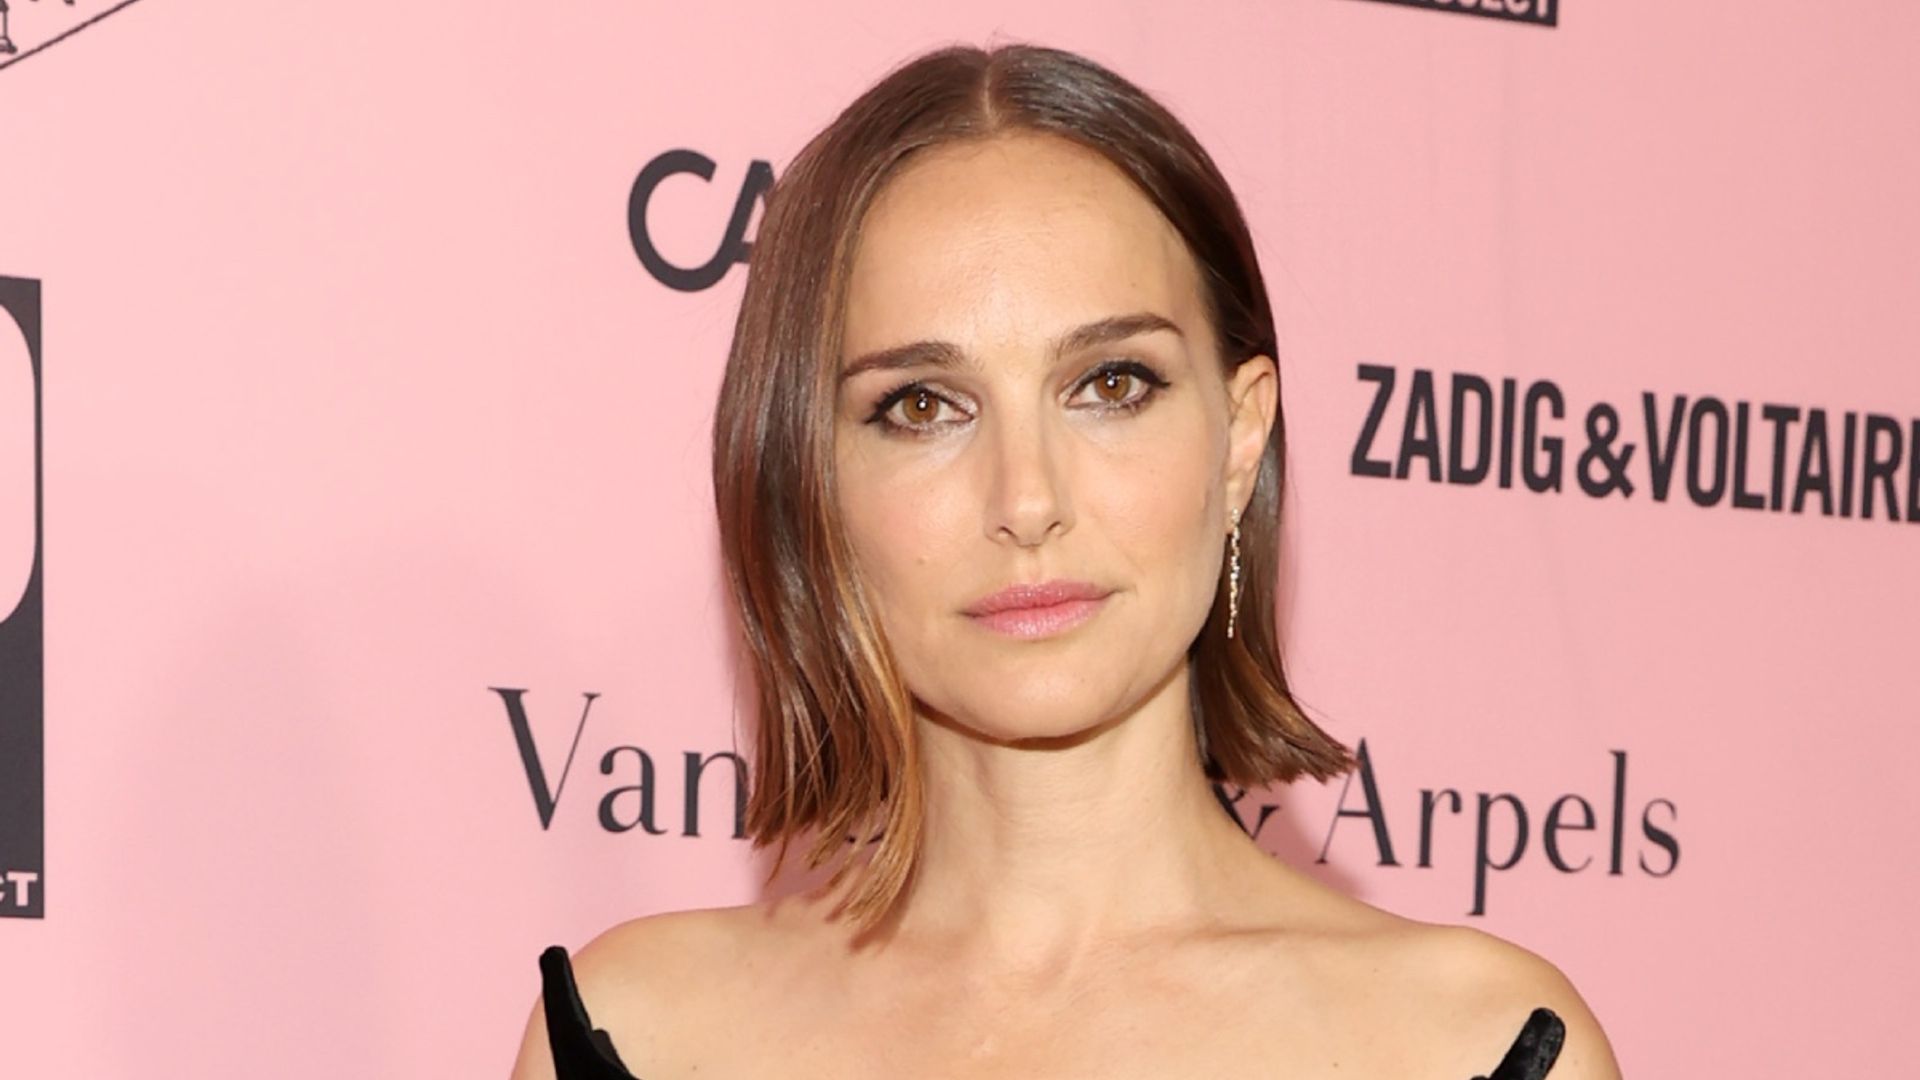 Natalie Portman in an ethereal sheer red gown will leave you stunned